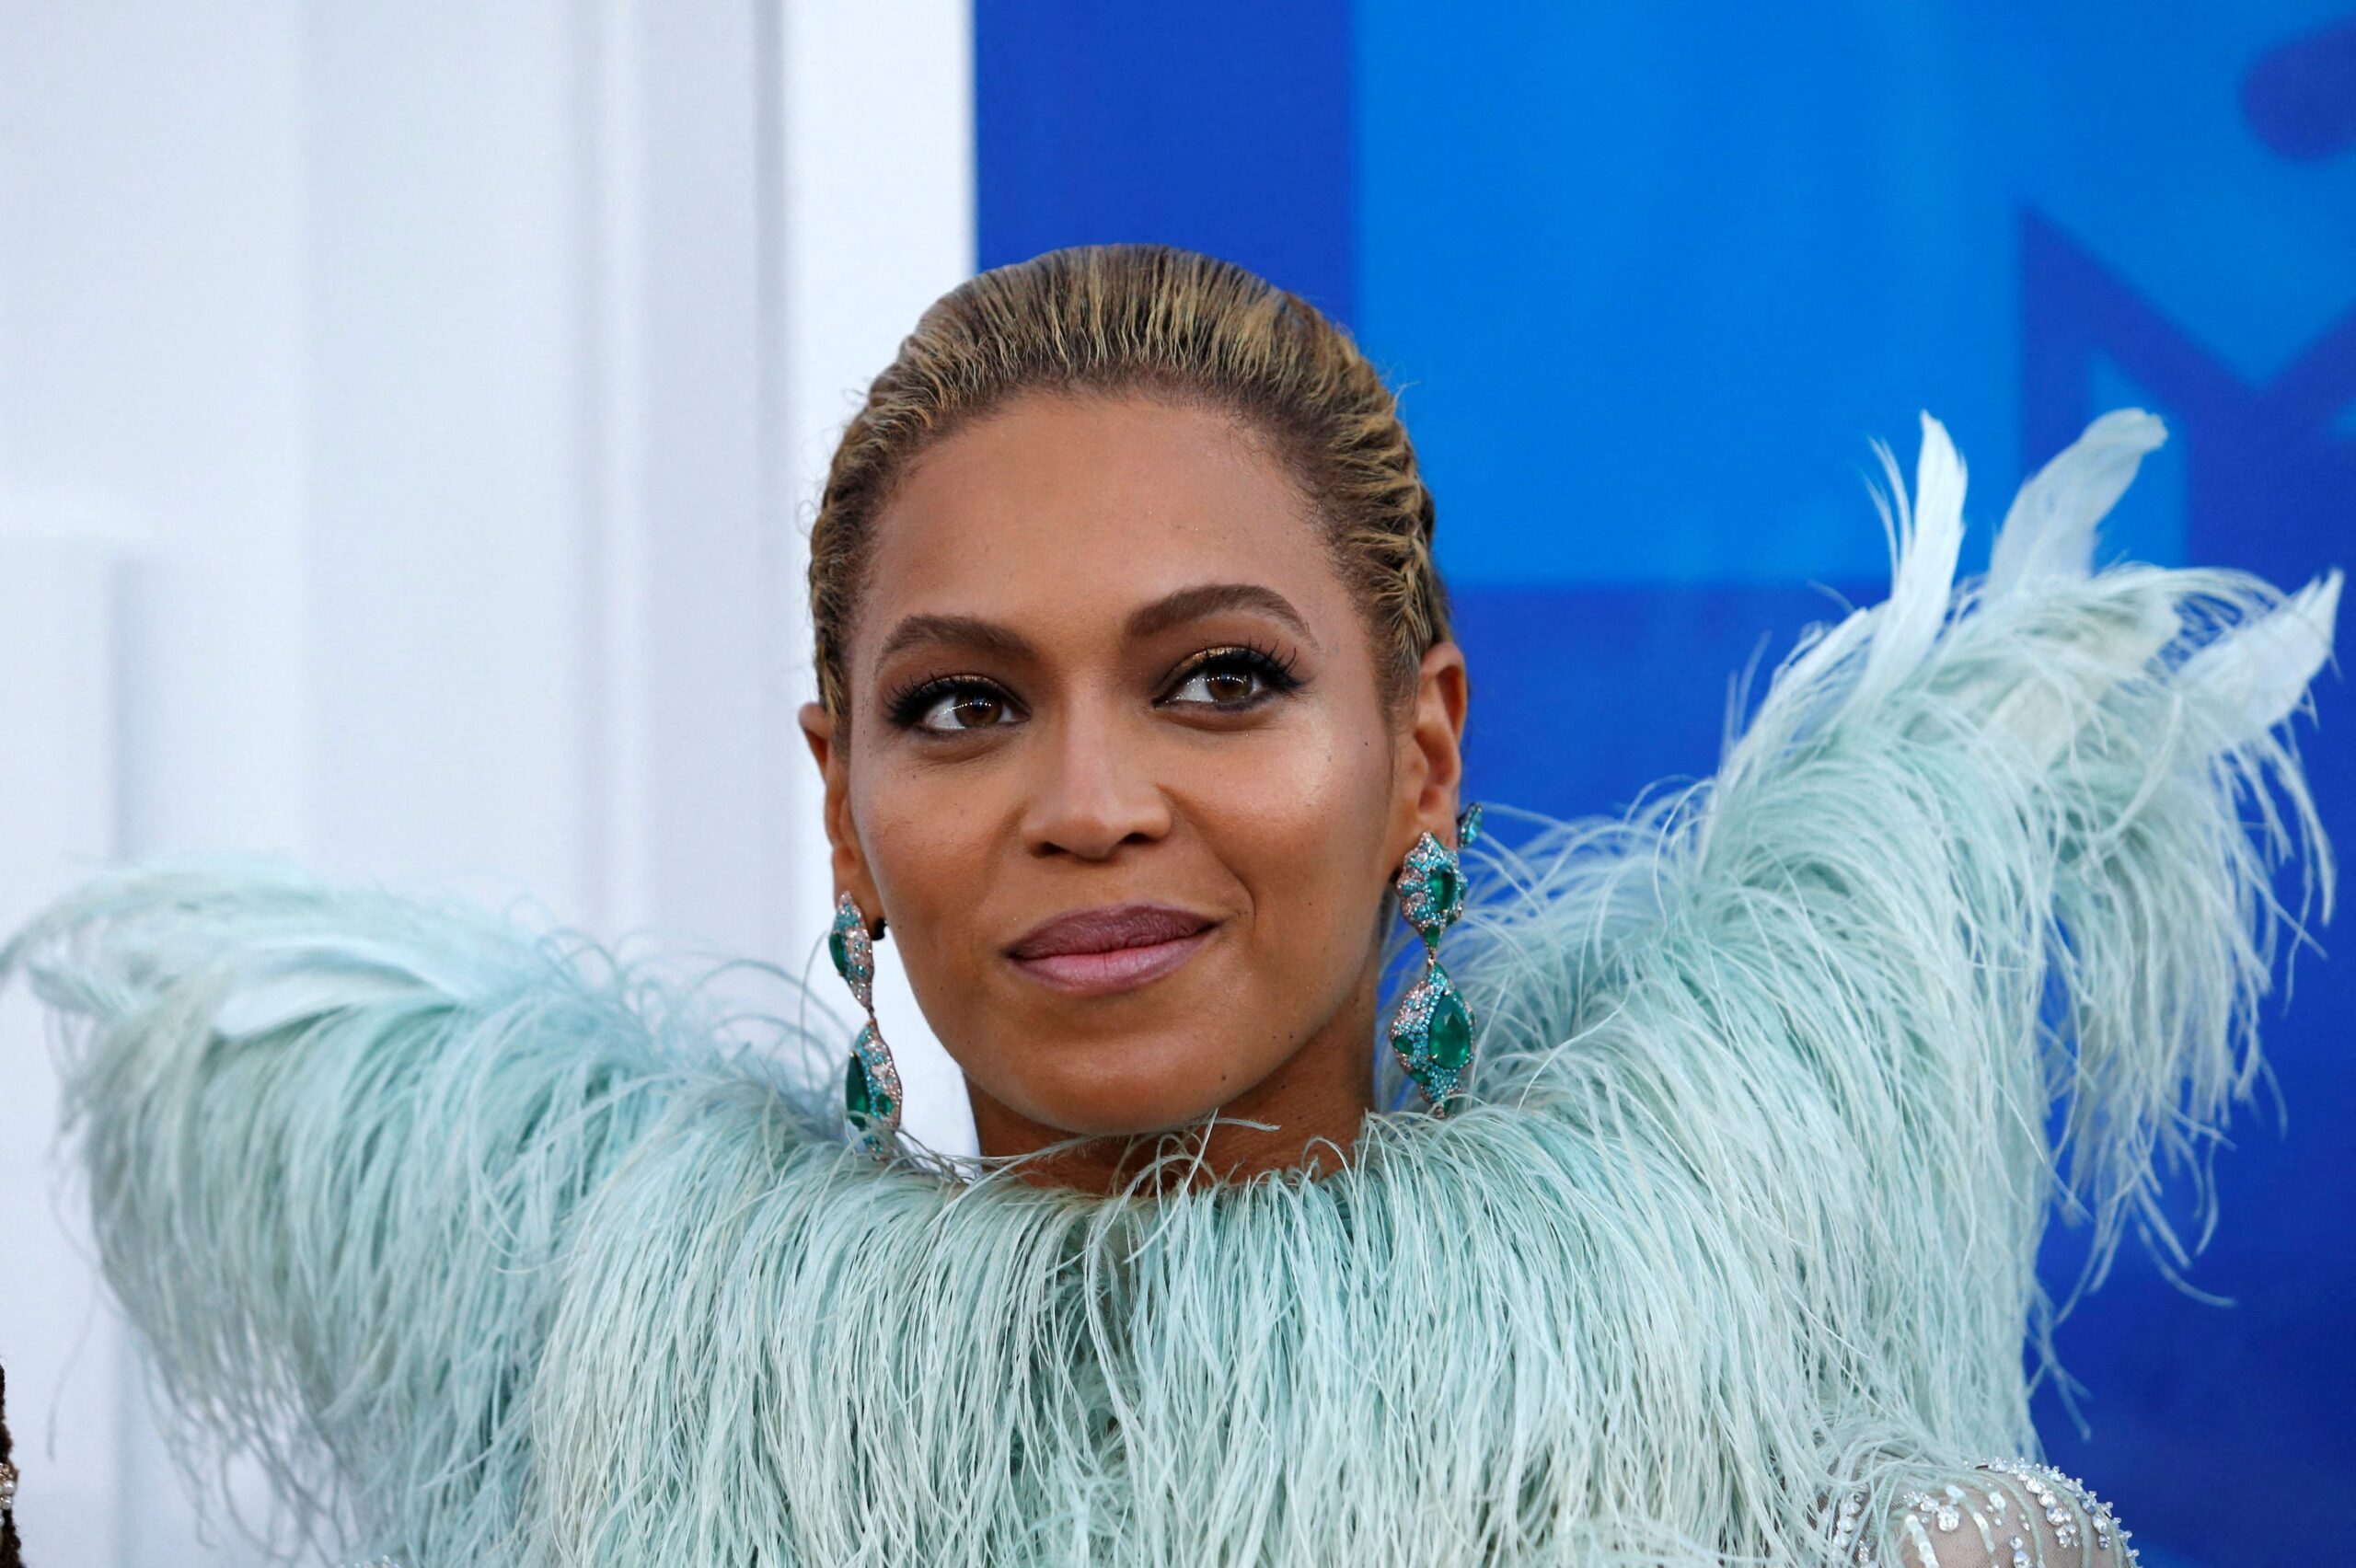 Does Beyonce’s new summer song channel the ‘Great Resignation’?